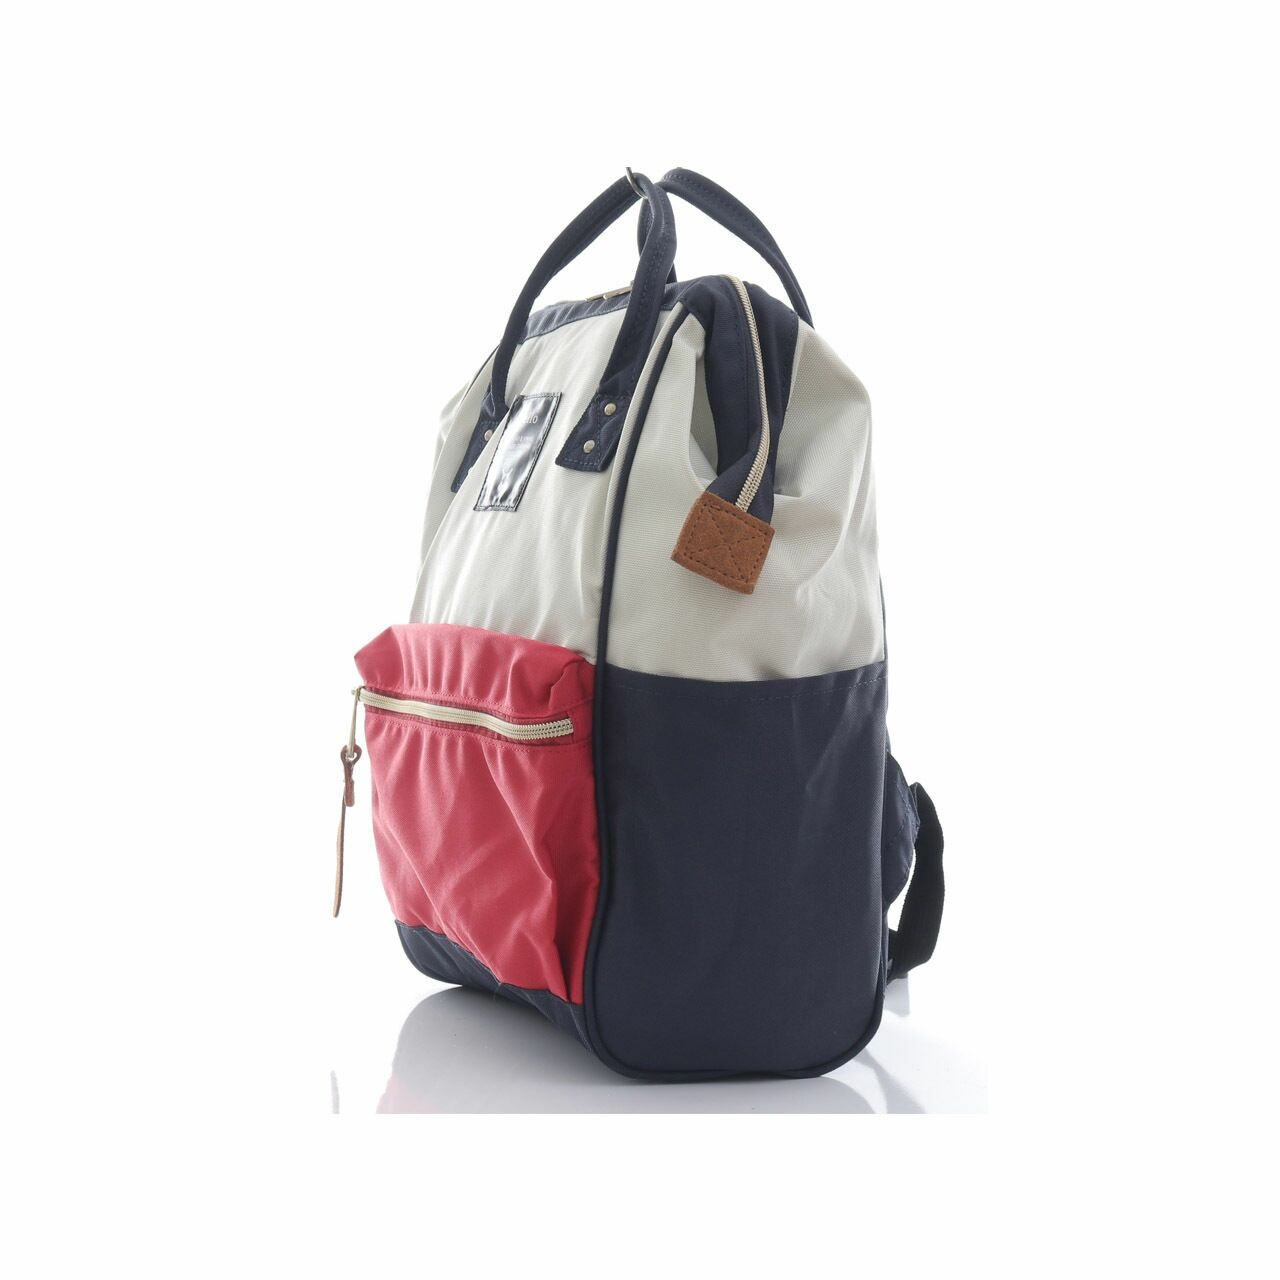 Anello Navy & Red Backpack